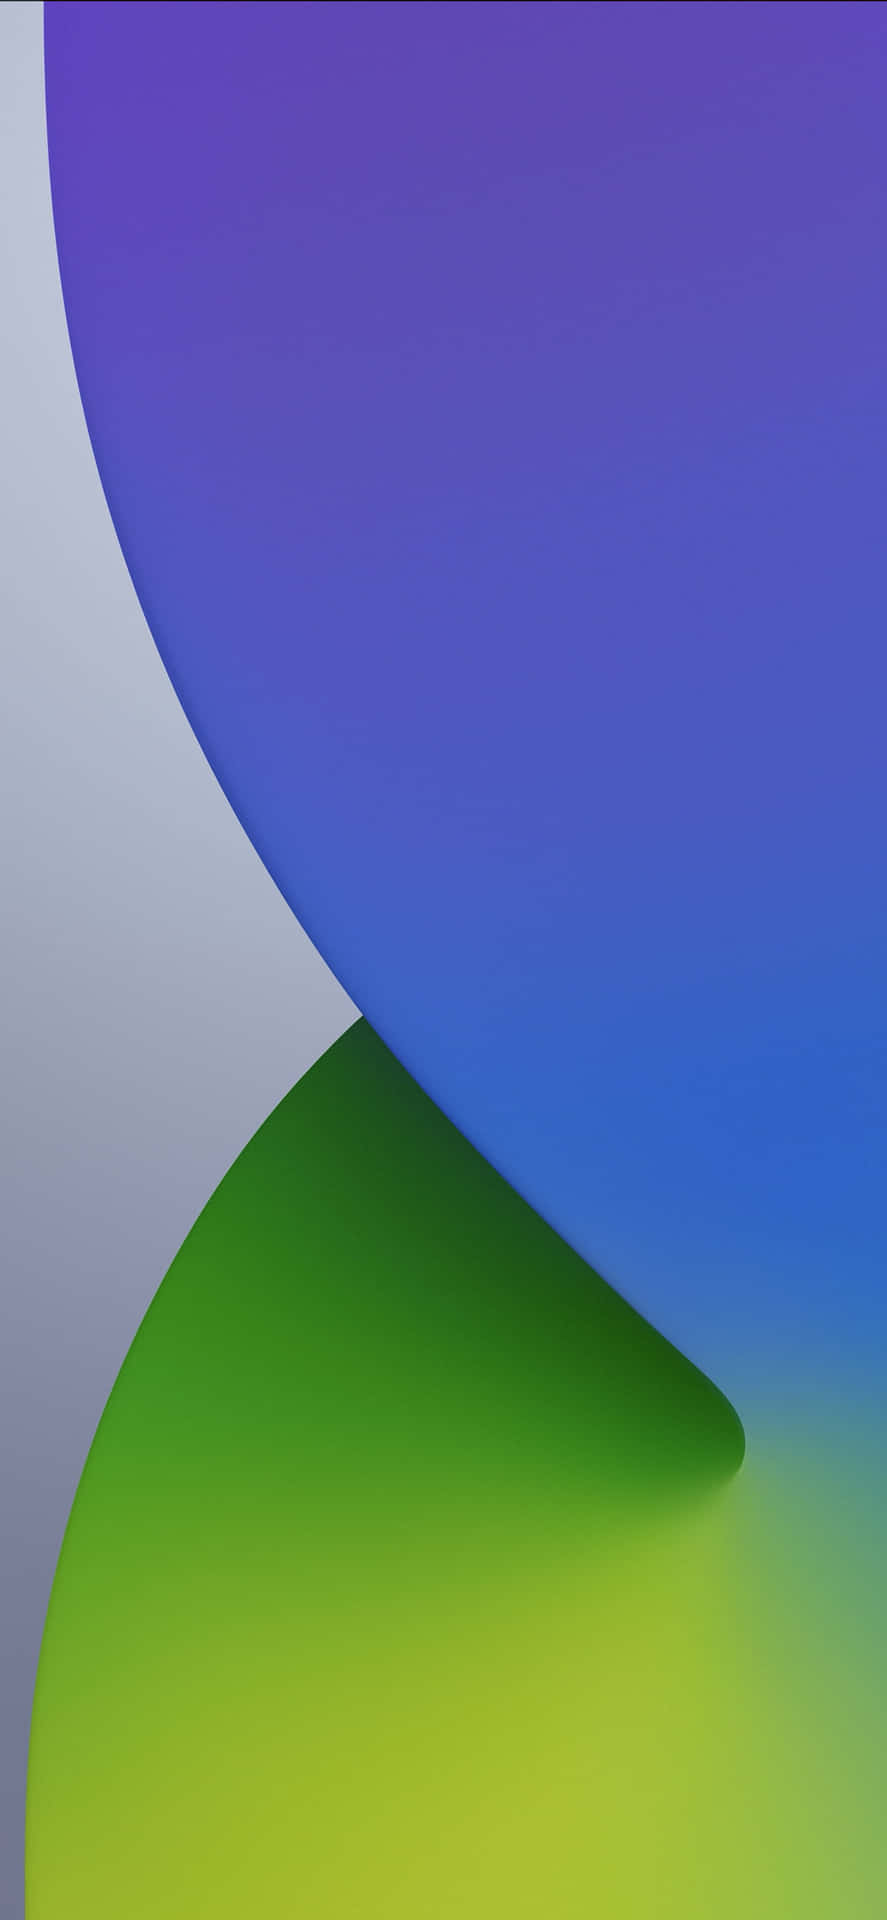 A Colorful And Green Background With A Blue And Green Gradient